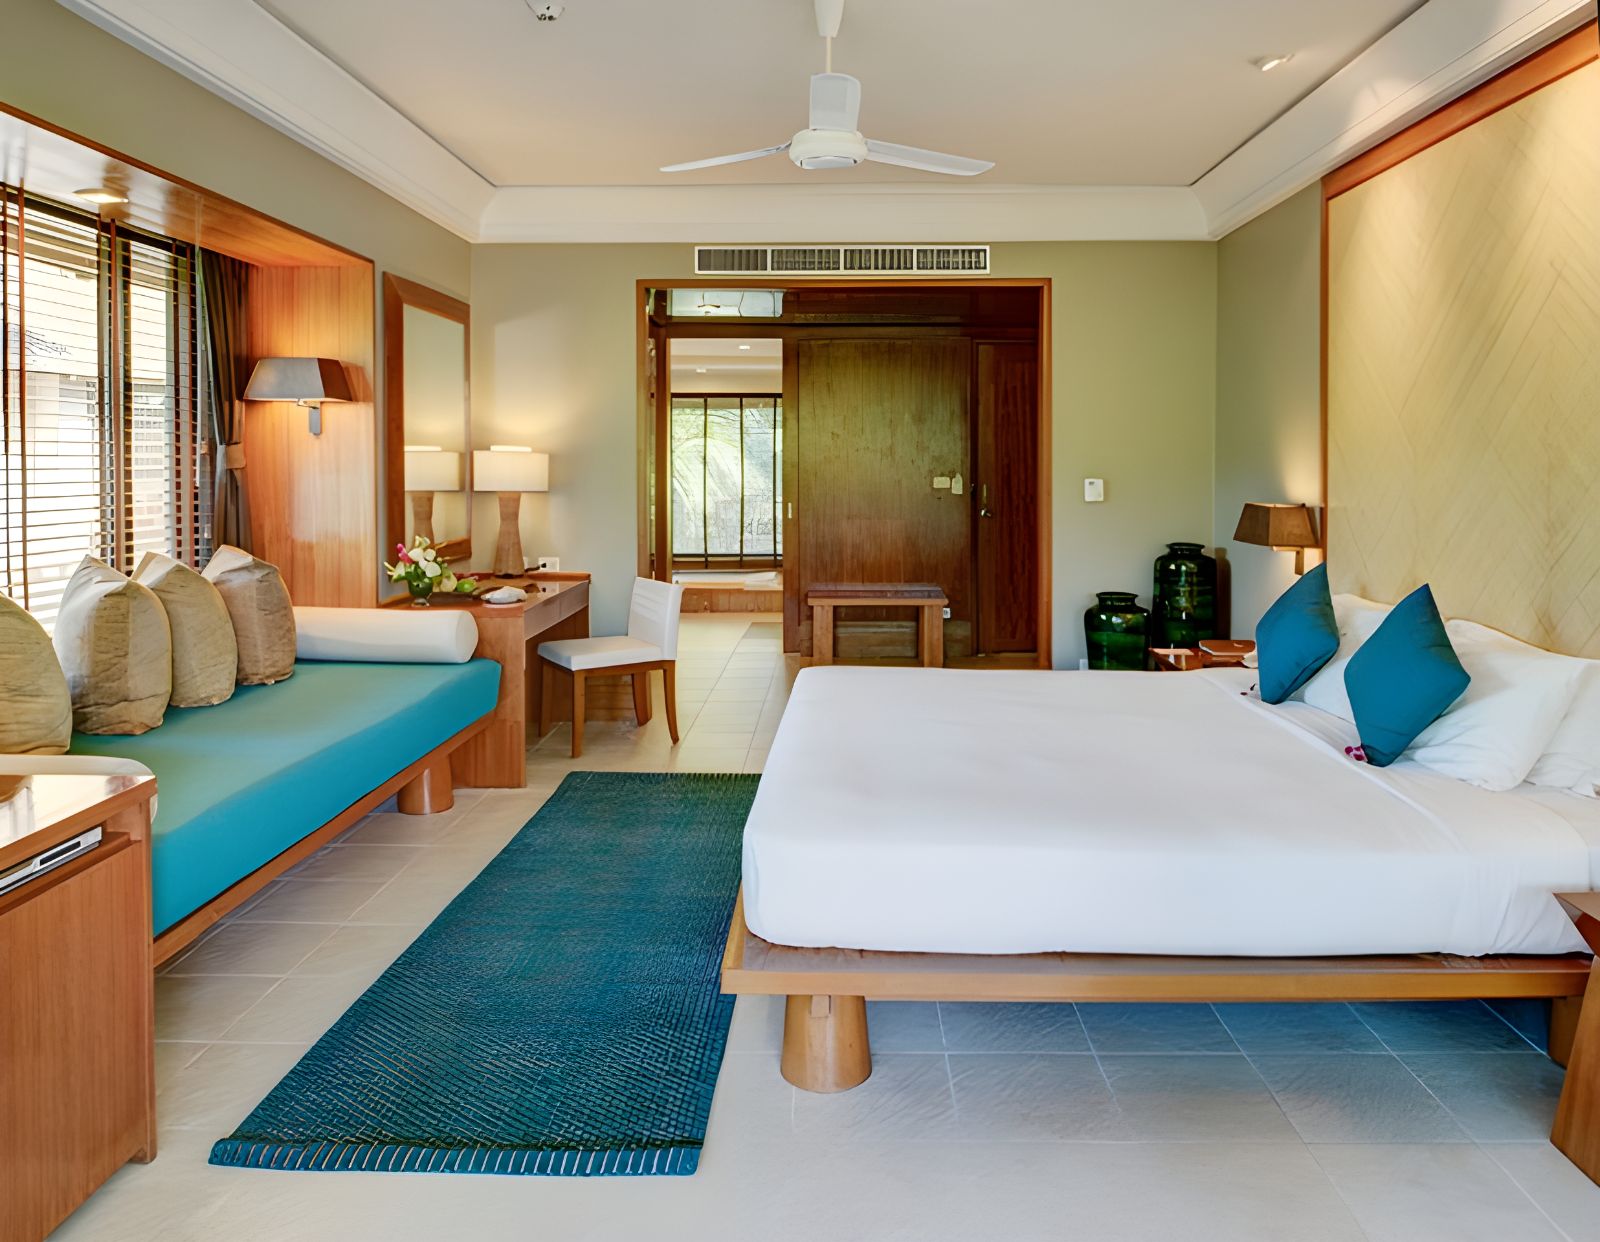 Double guest suite at Layana Resort & Spa in the Koh Lanta region of Thailand